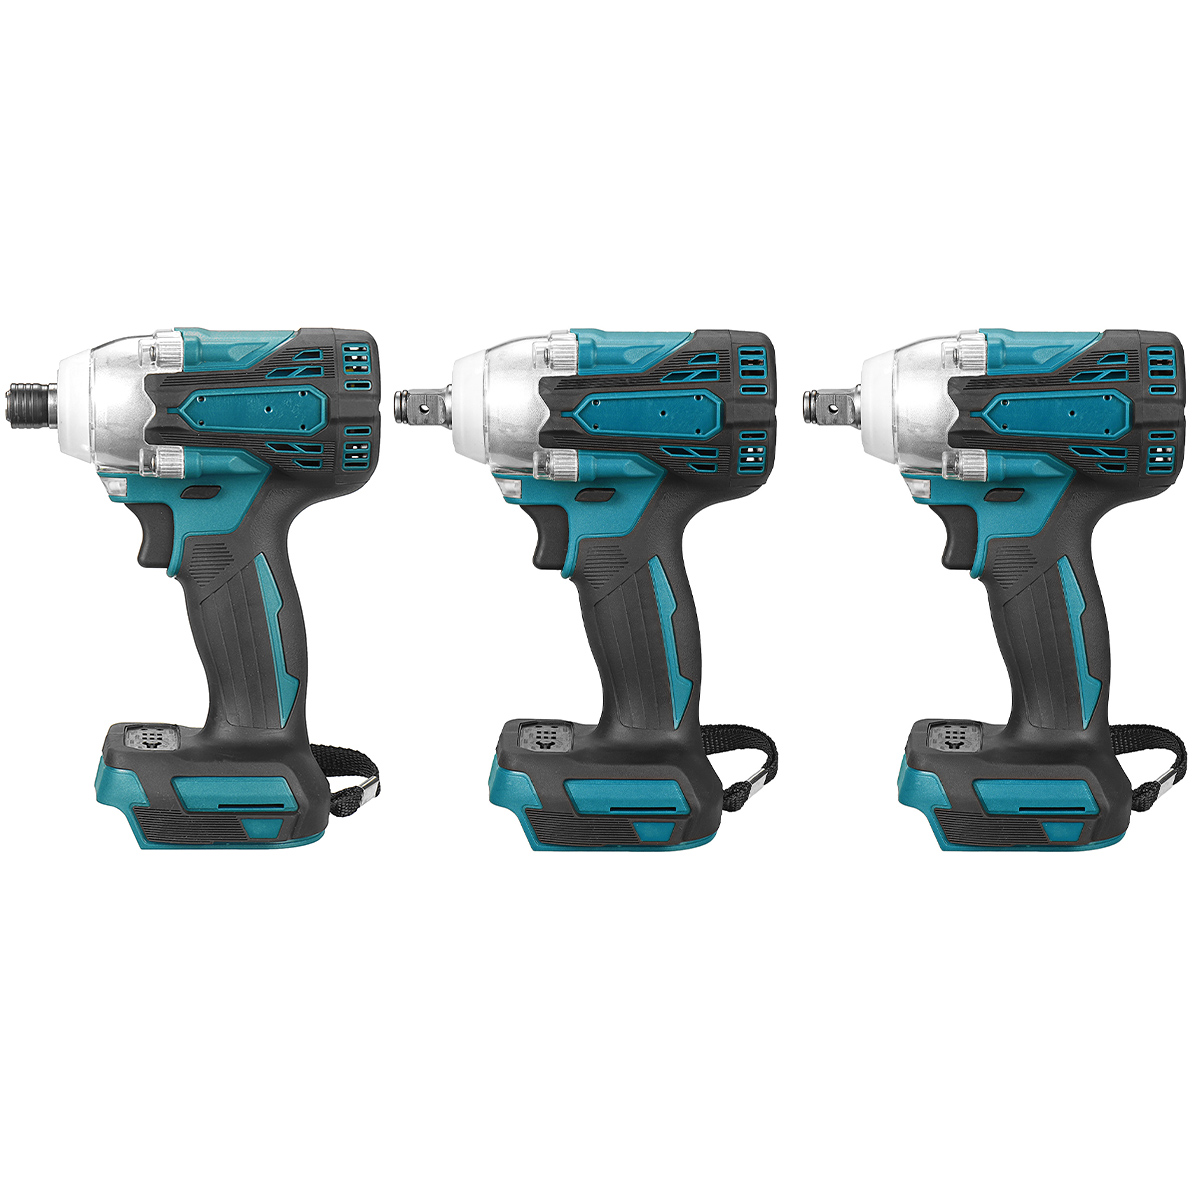 125mm-Cordless-Brushless-Impact-Wrench-Drill-Drive-Screwdriver-Power-Tool-For-Makita-18V-battery-1855969-10